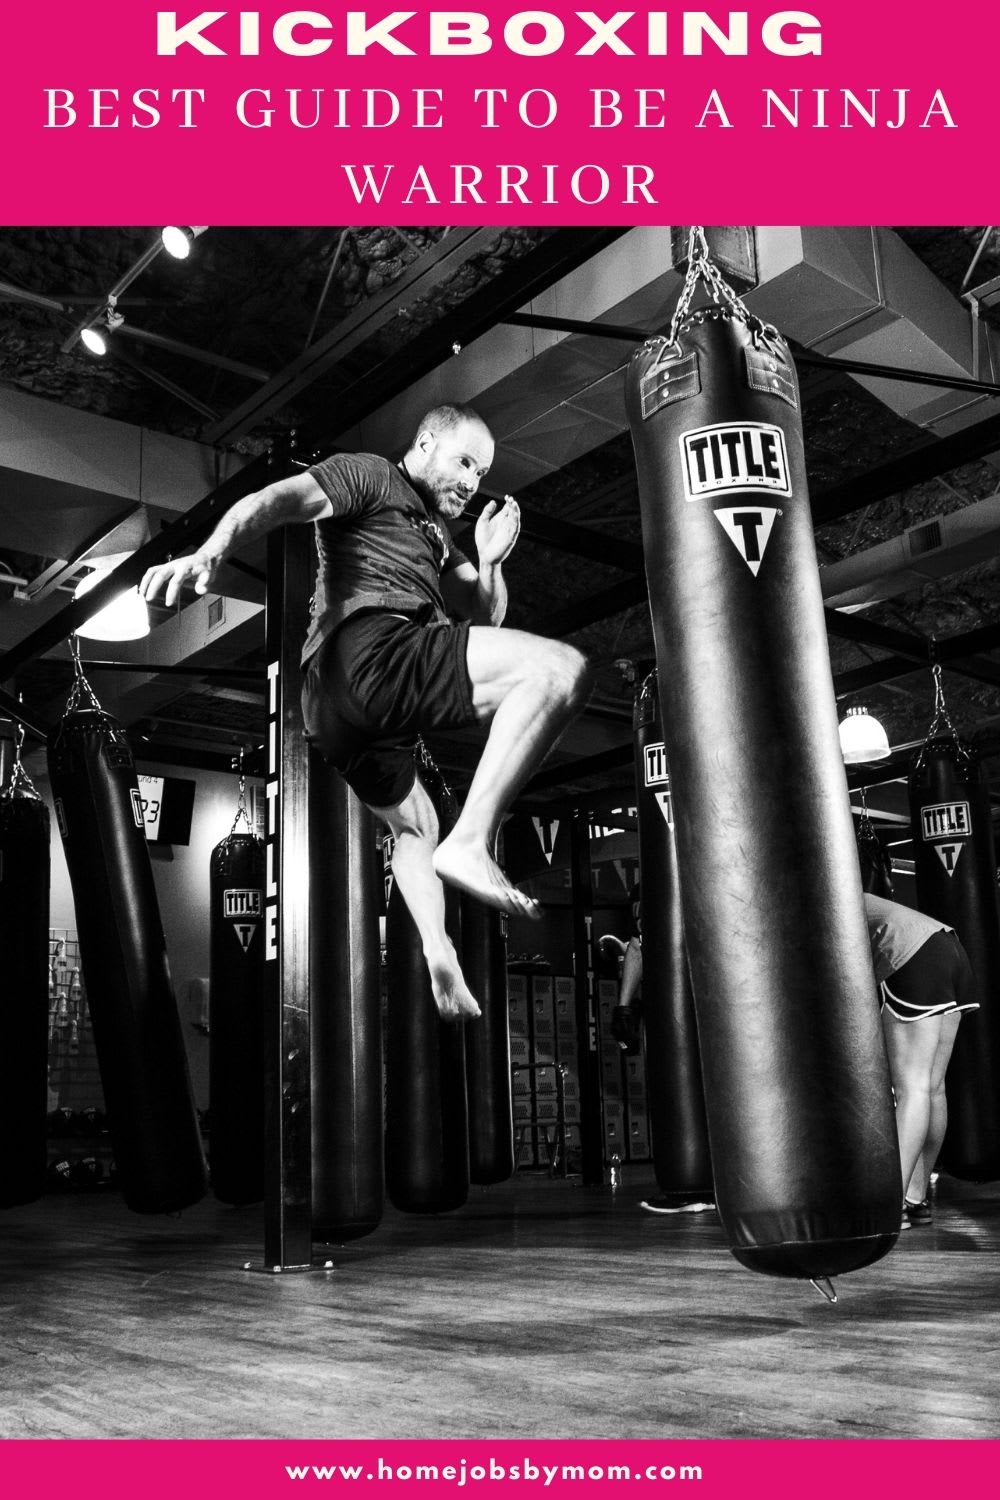 Kickboxing: Best Guide To Be a Ninja Warrior